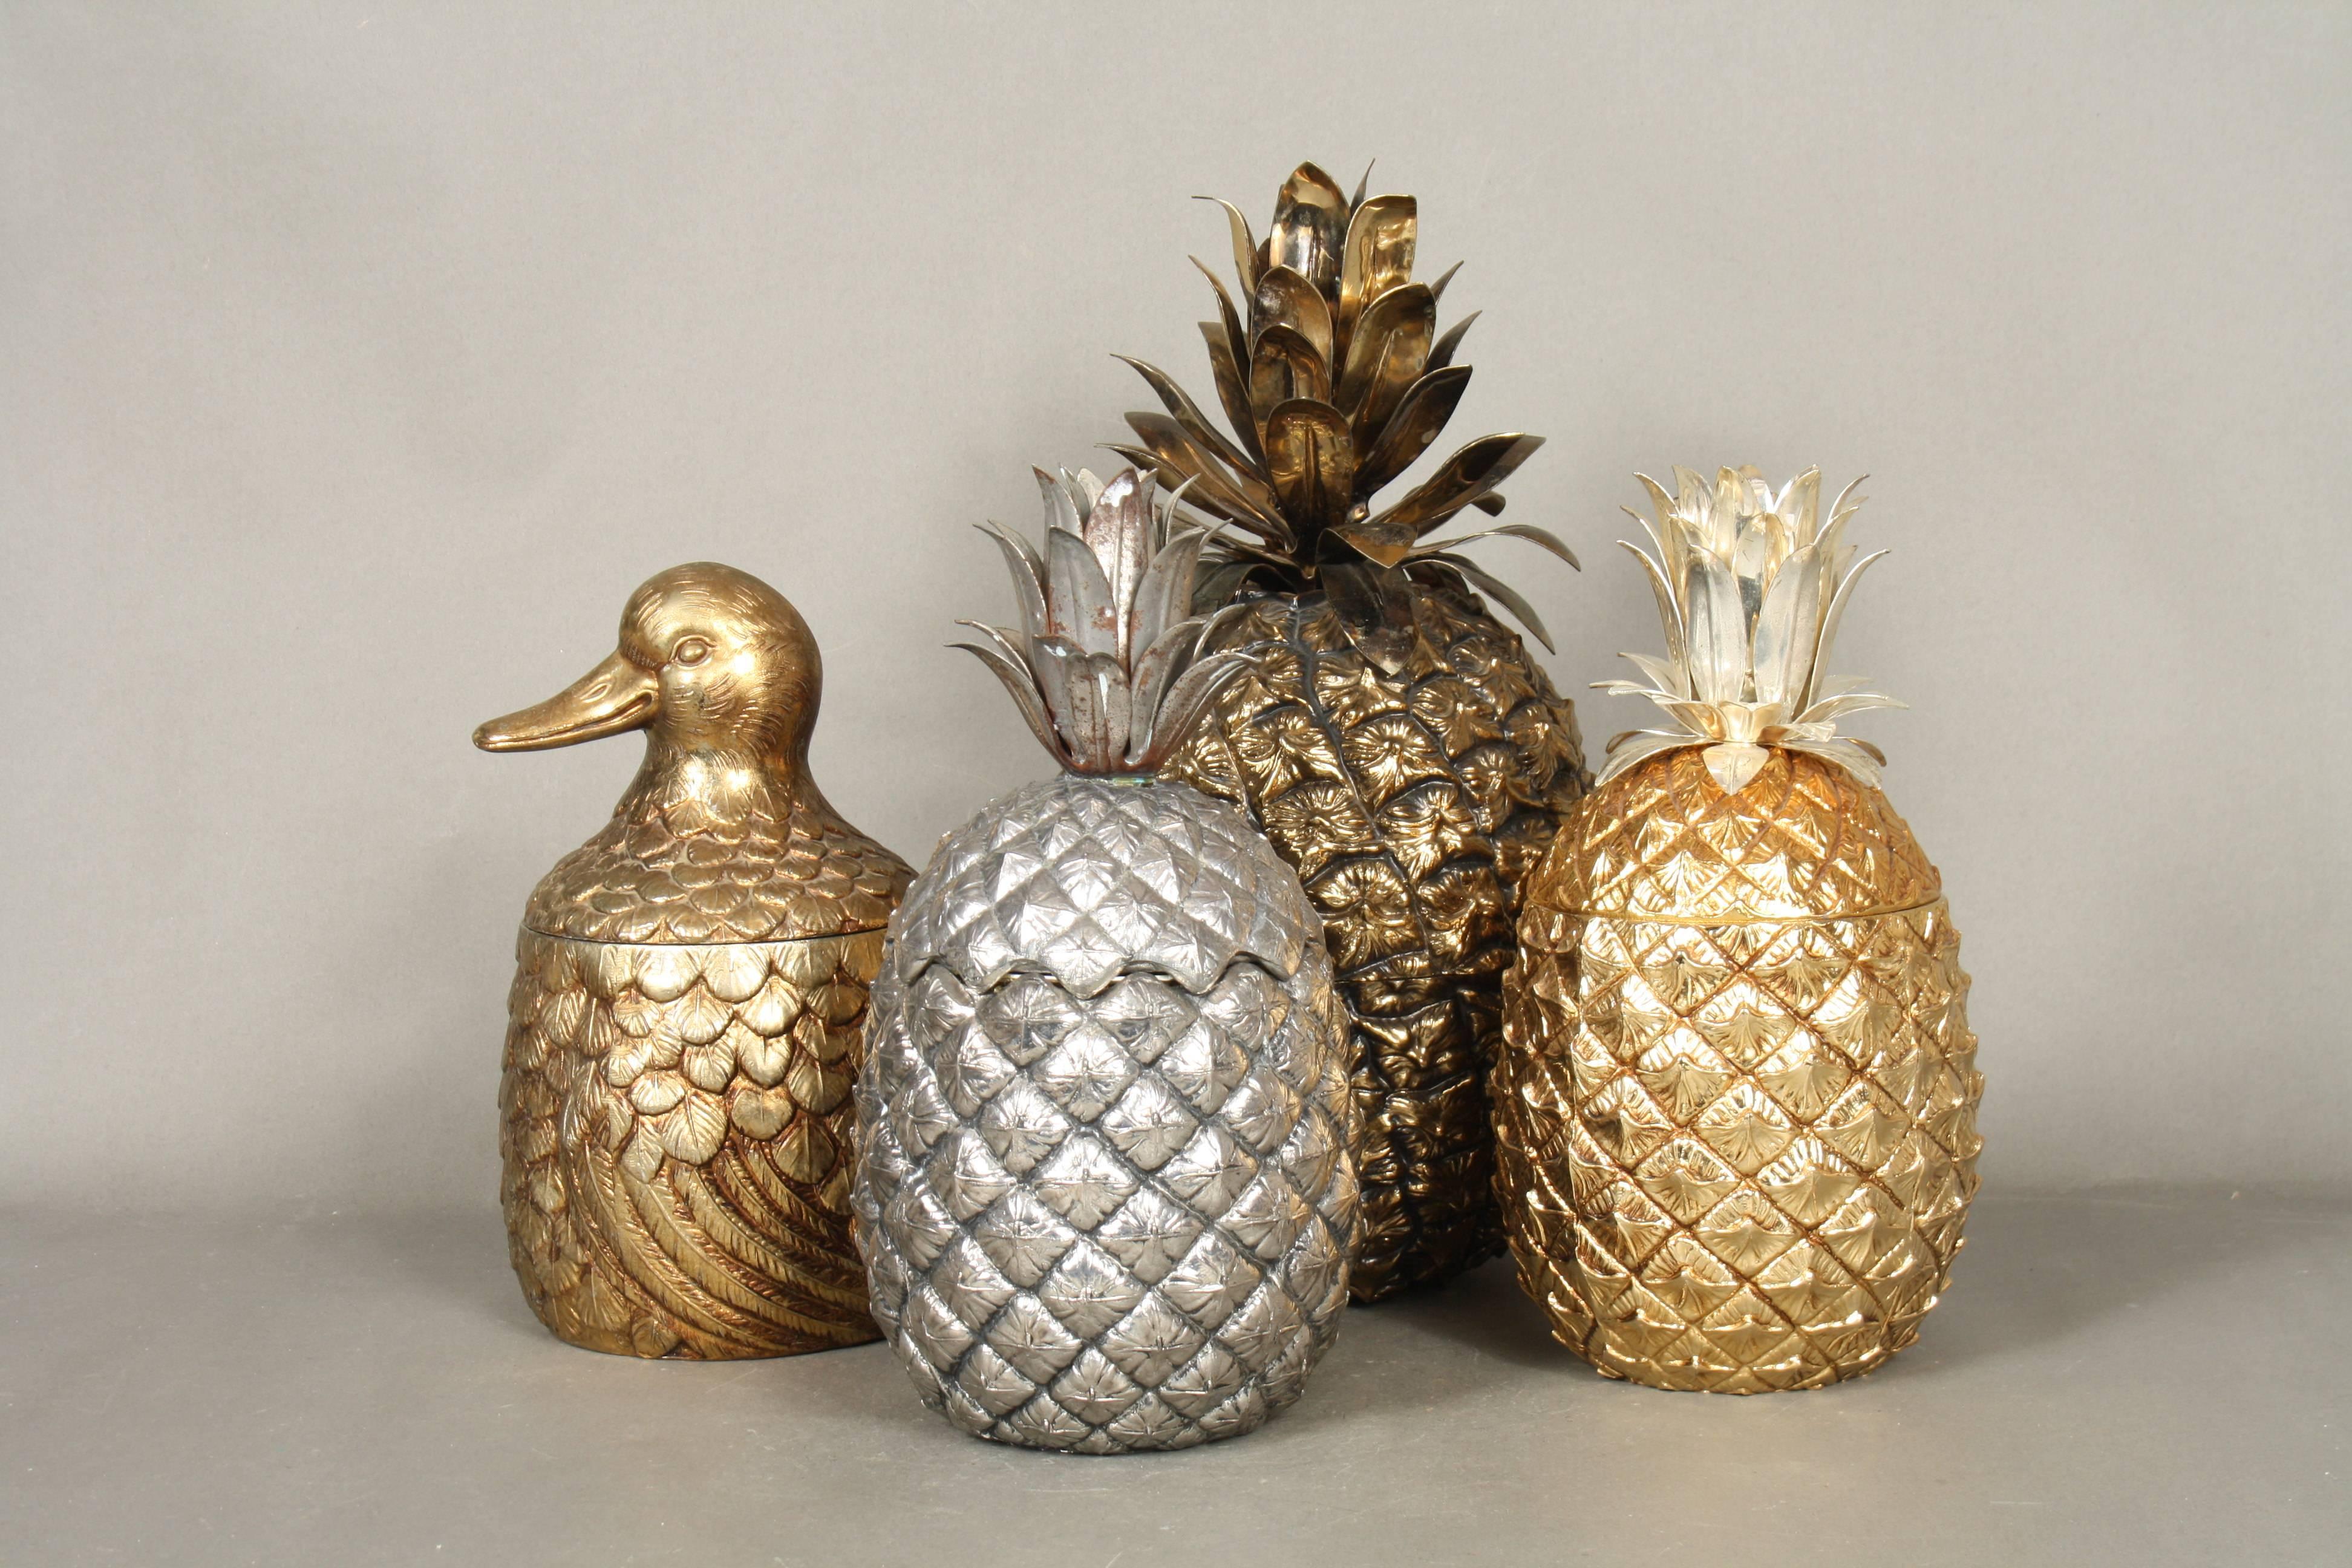 Swiss Extra Large Gilt Colored Freddo Therm Pineapple Ice Bucket, 1960s For Sale 3